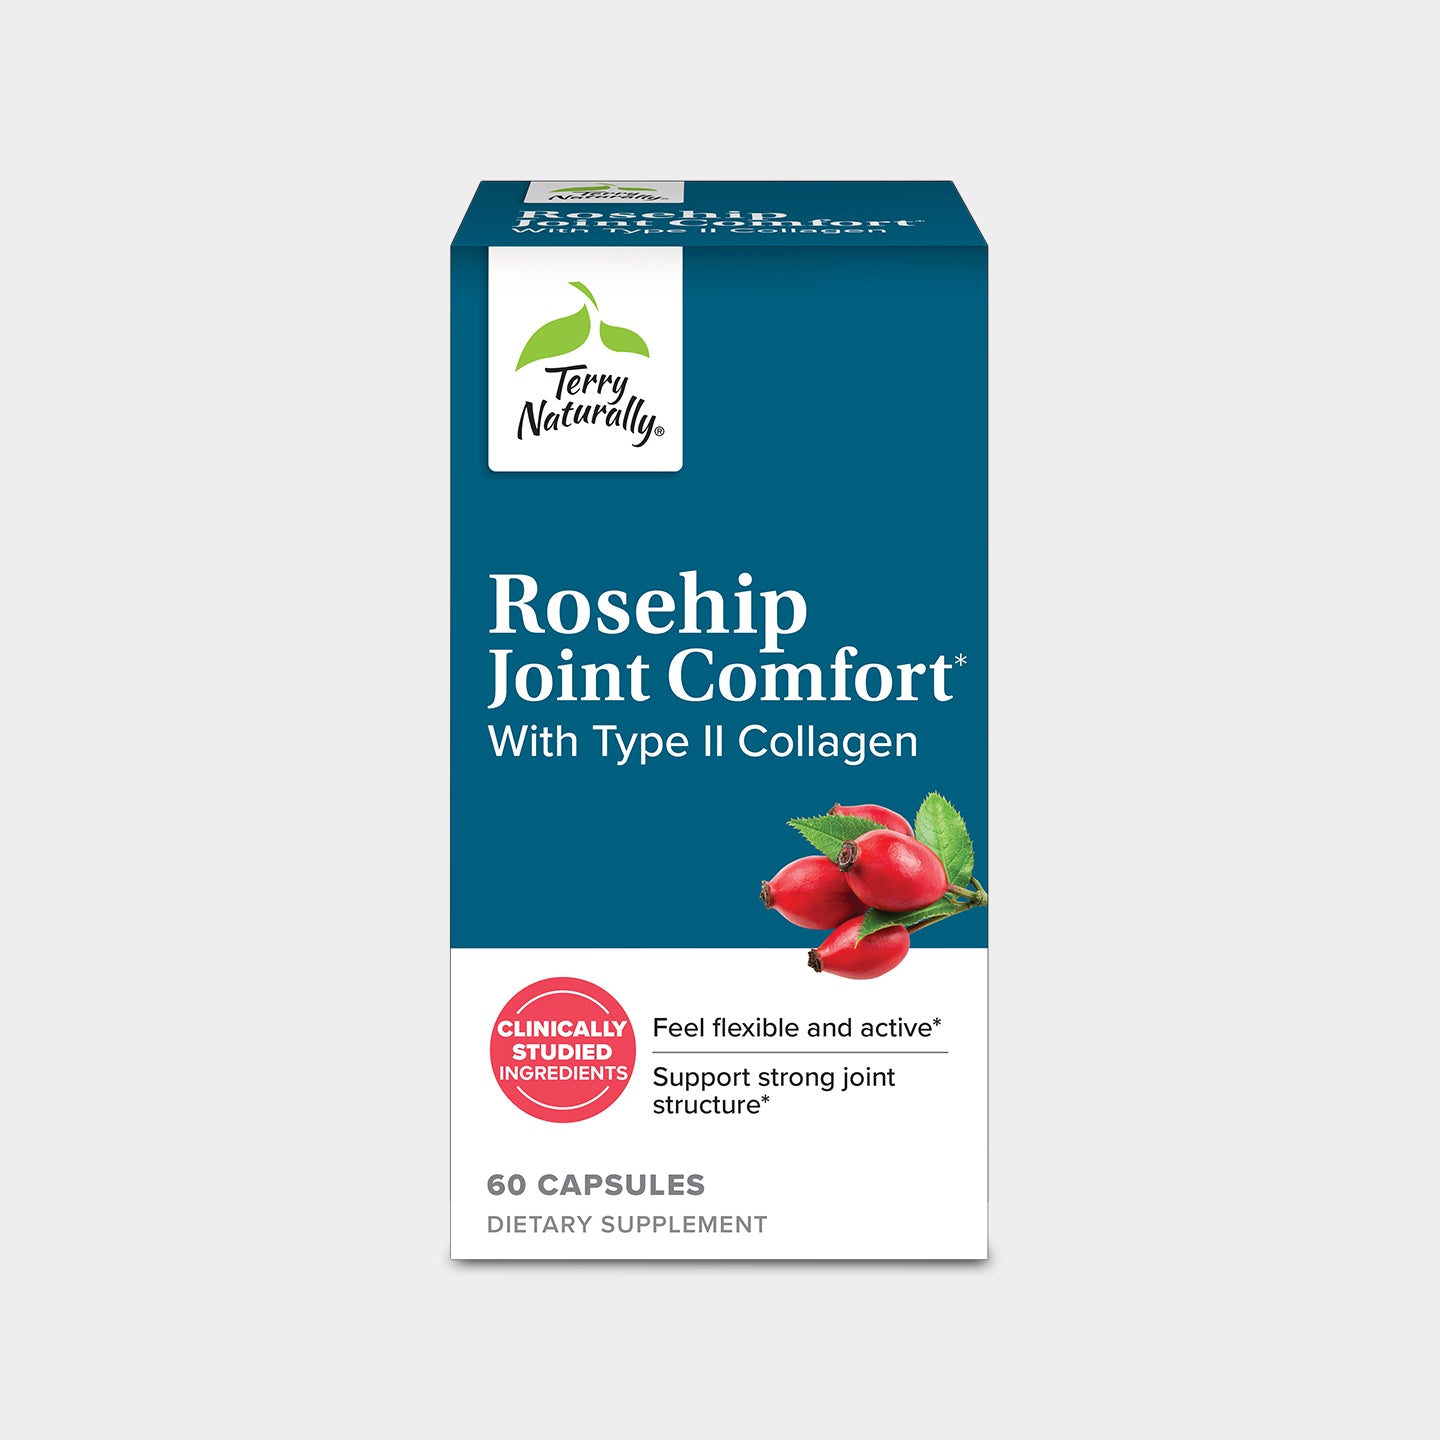 Terry Naturally Rosehip Joint Comfort A1